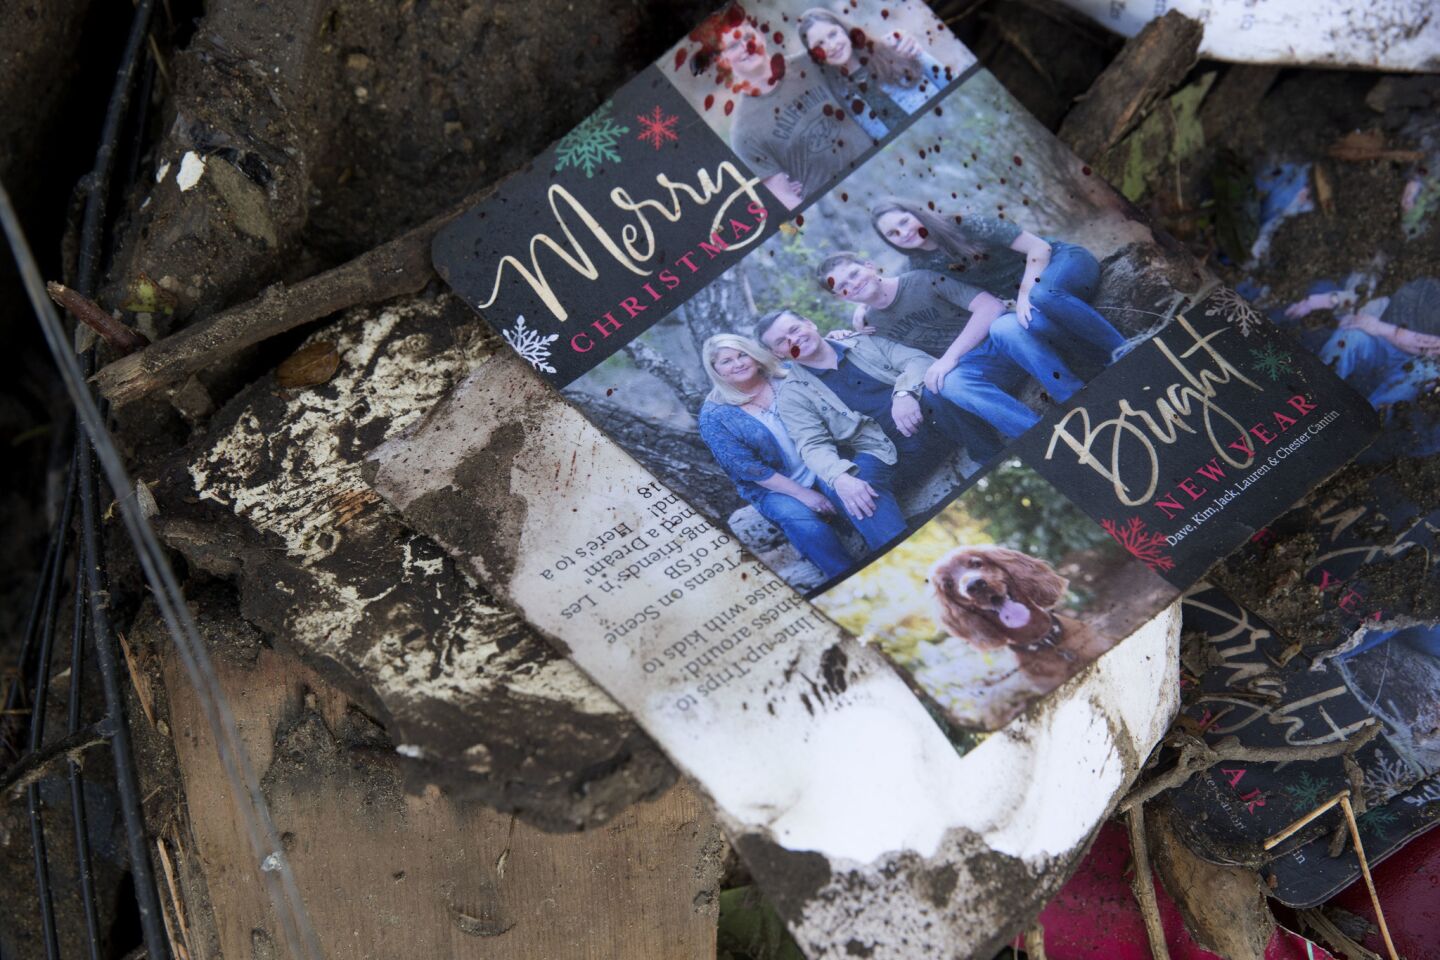 A Cantin family holiday card in a pile of debris in the 300 block of Hot Springs Road in Montecito. From left, Kim, mother who survived; father David, who was killed; son Jack, who is still missing; and daugher Lauren, who was pulled from the family home early Wednesday.